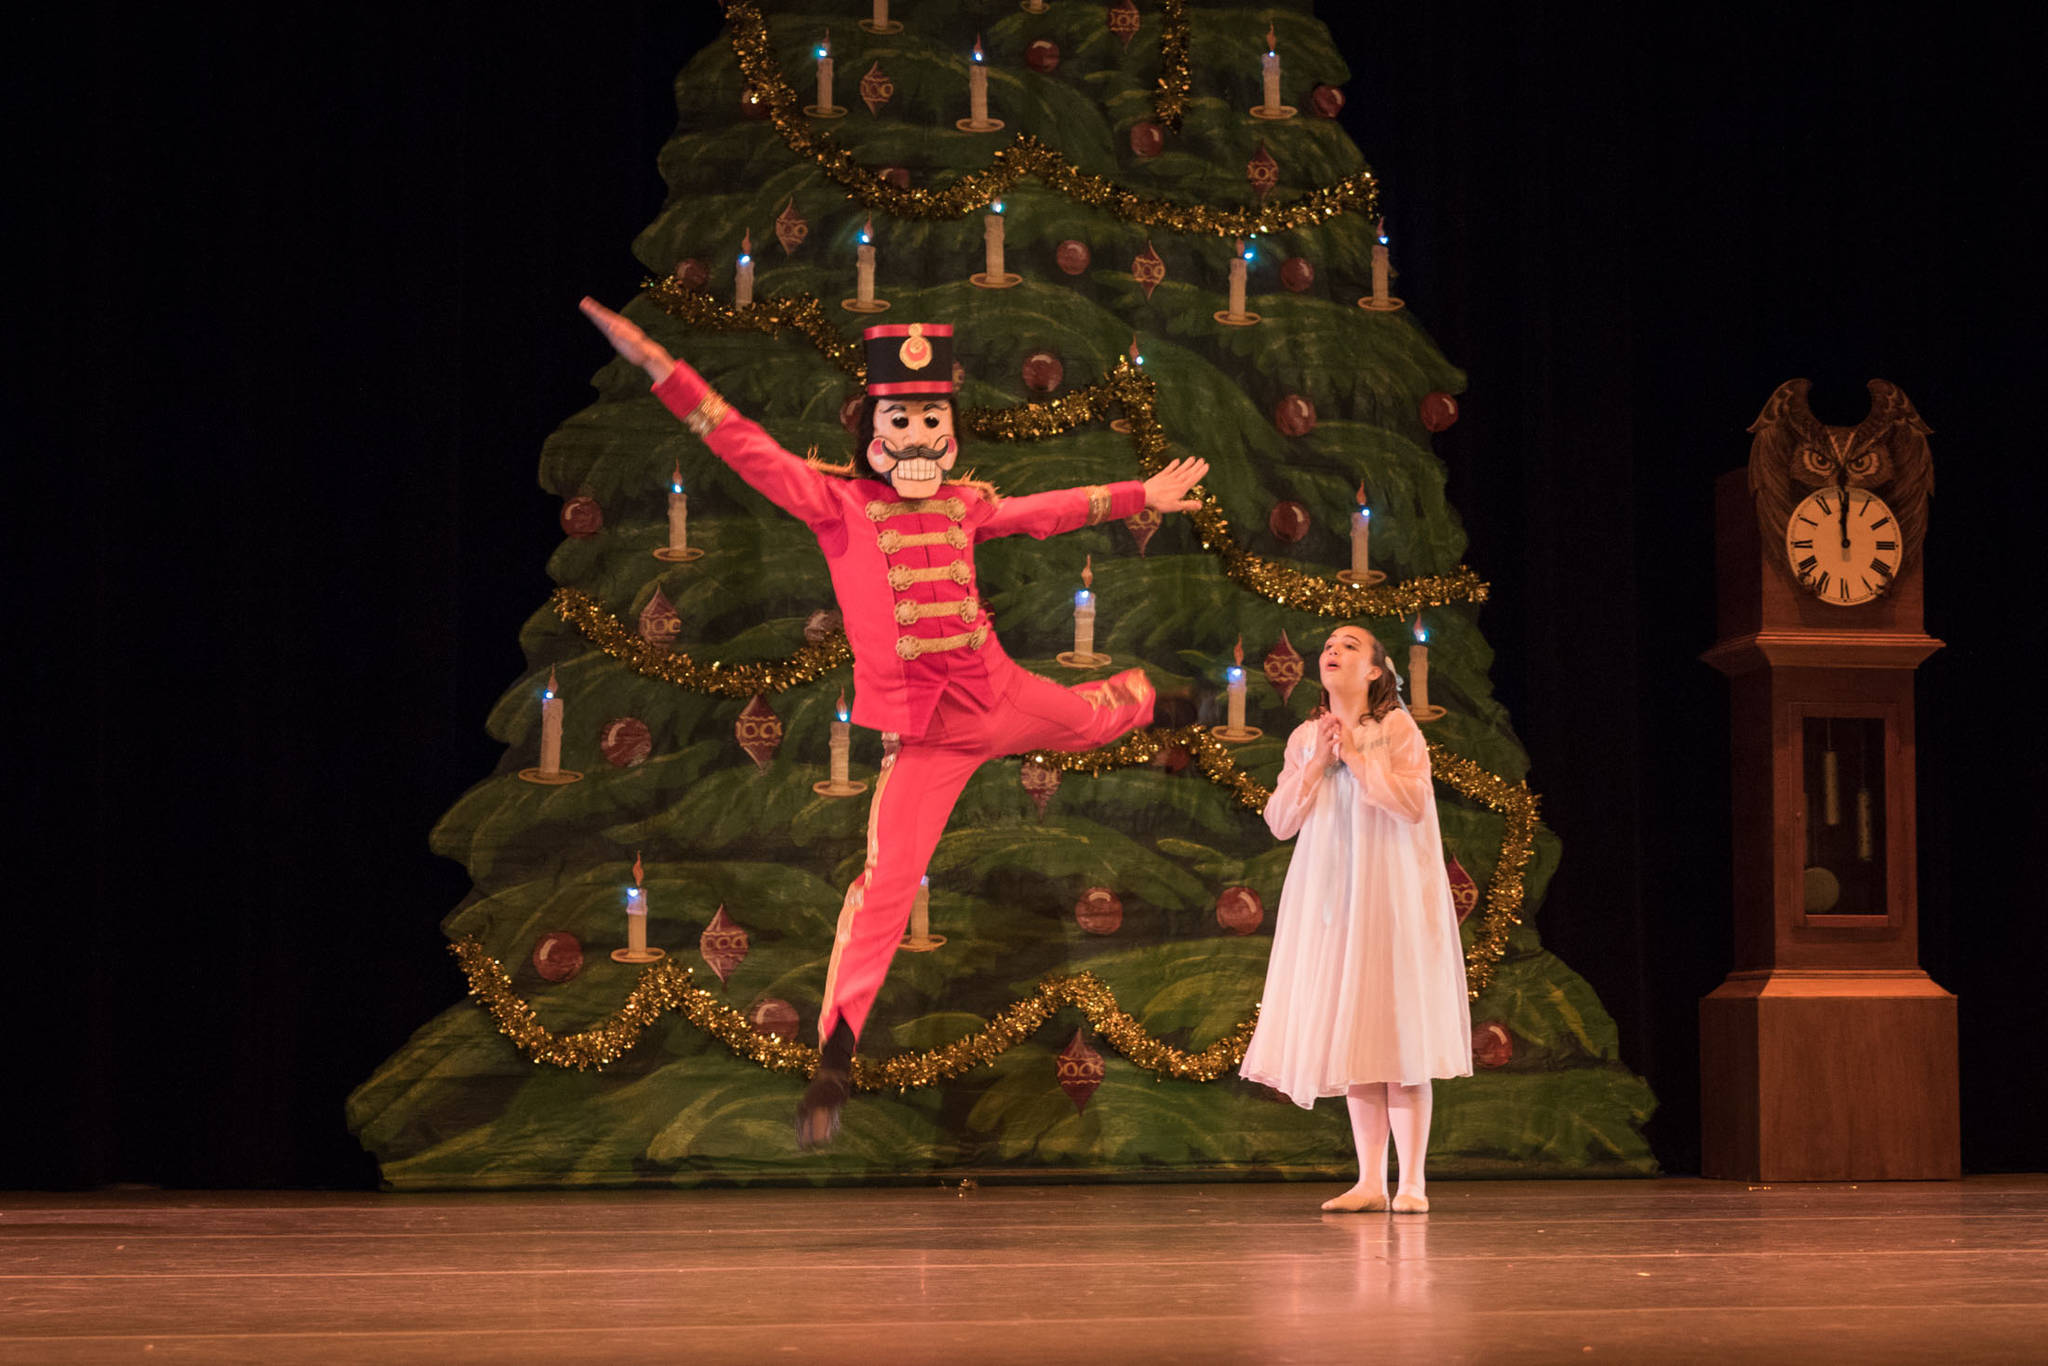 The Nutcracker, played by Kincaid Parsons, leaps across the stage as and Marie, played by Grace Gjertsen, looks on. Photo by Bobbi Jordan.